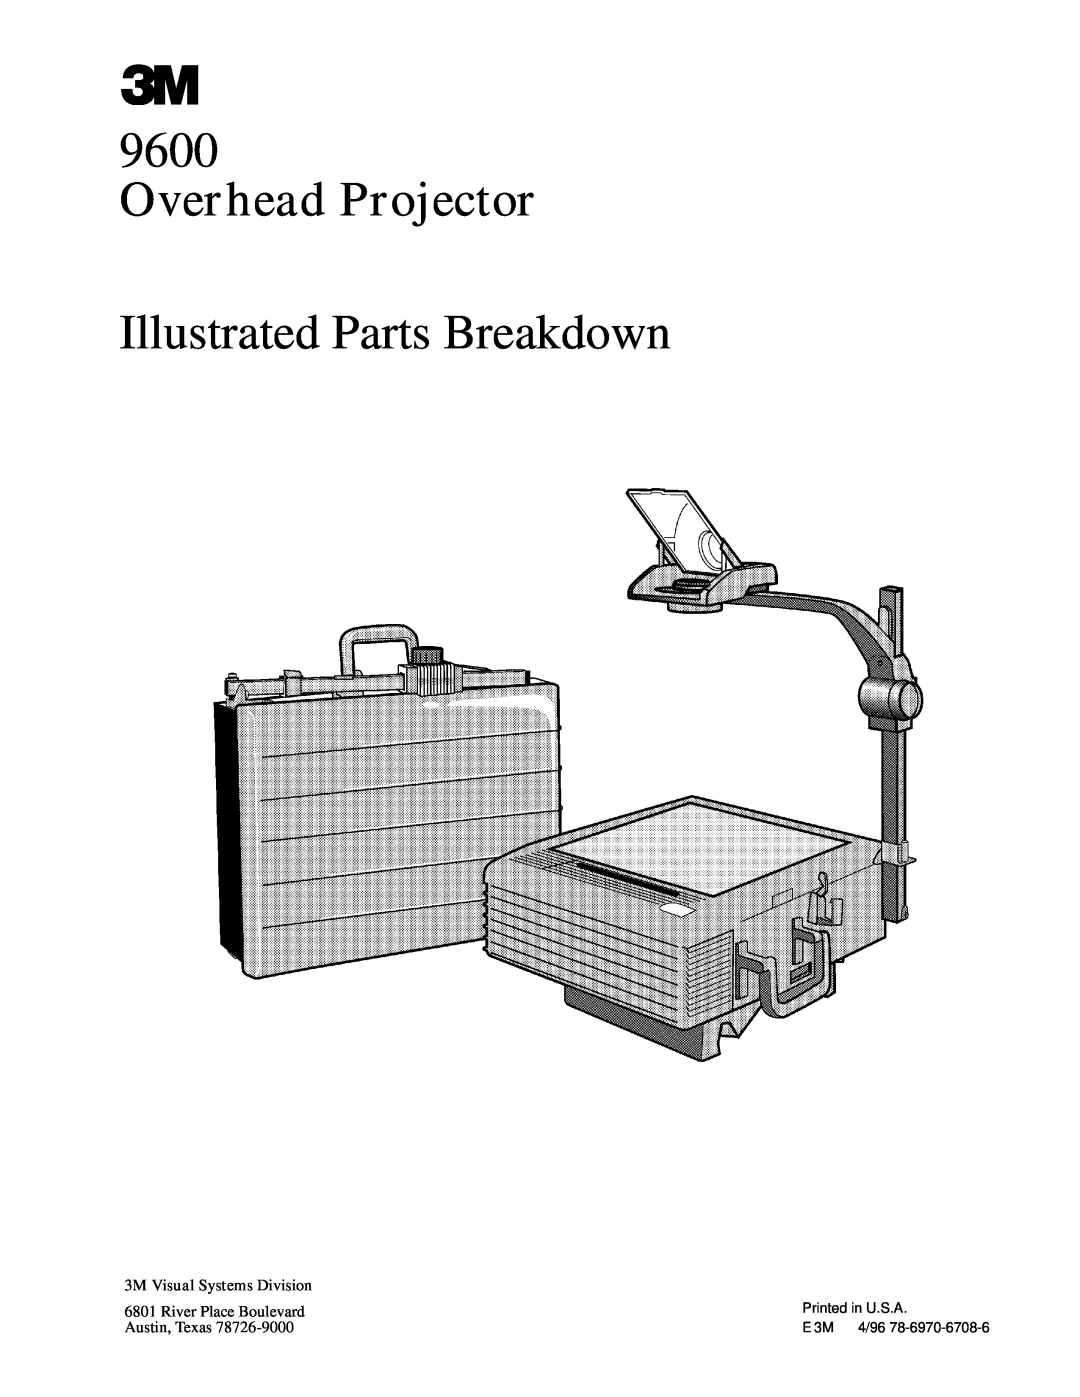 3M 9600 manual Overhead Projector, Illustrated Parts Breakdown, 3M Visual Systems Division, River Place Boulevard, 4/96 